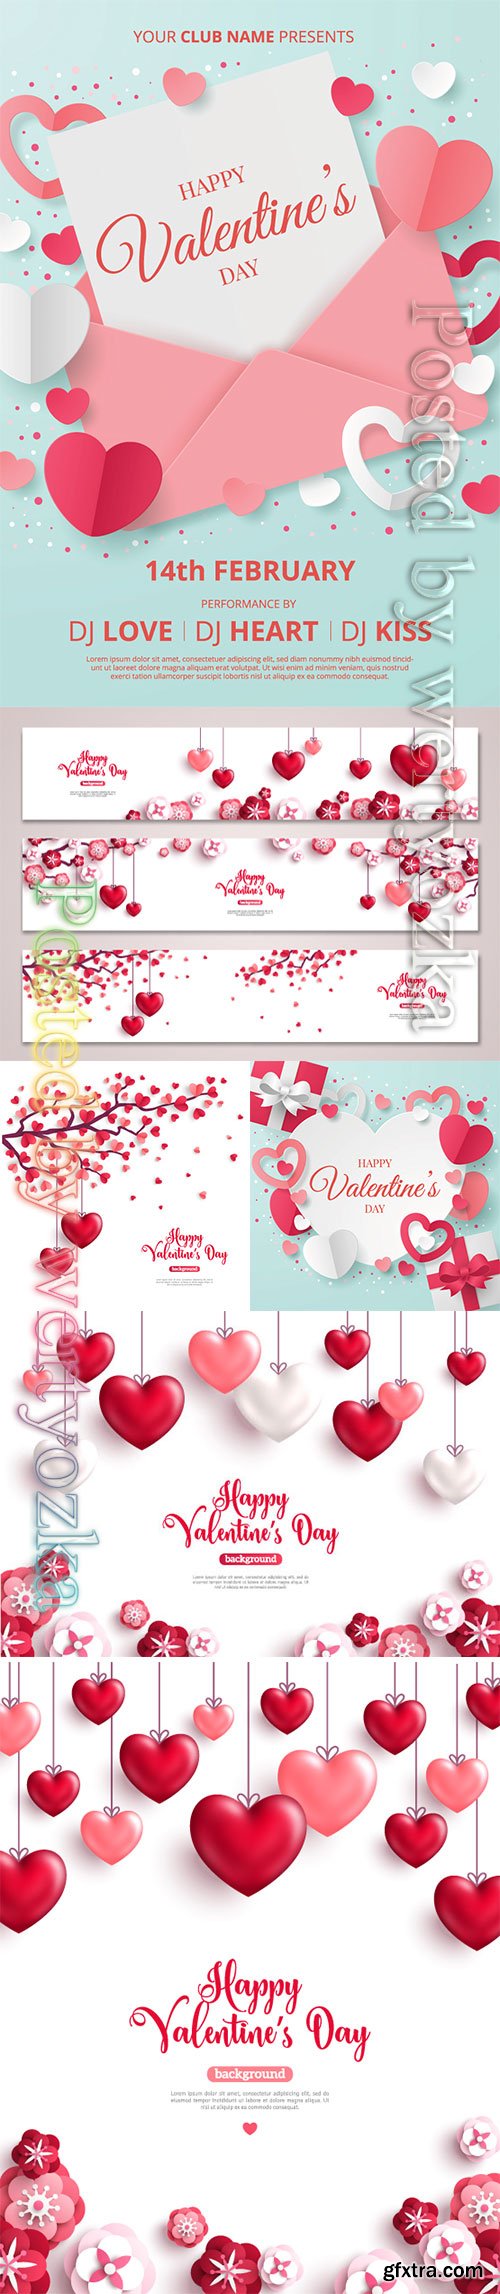 Valentines day vector background with heart # 4